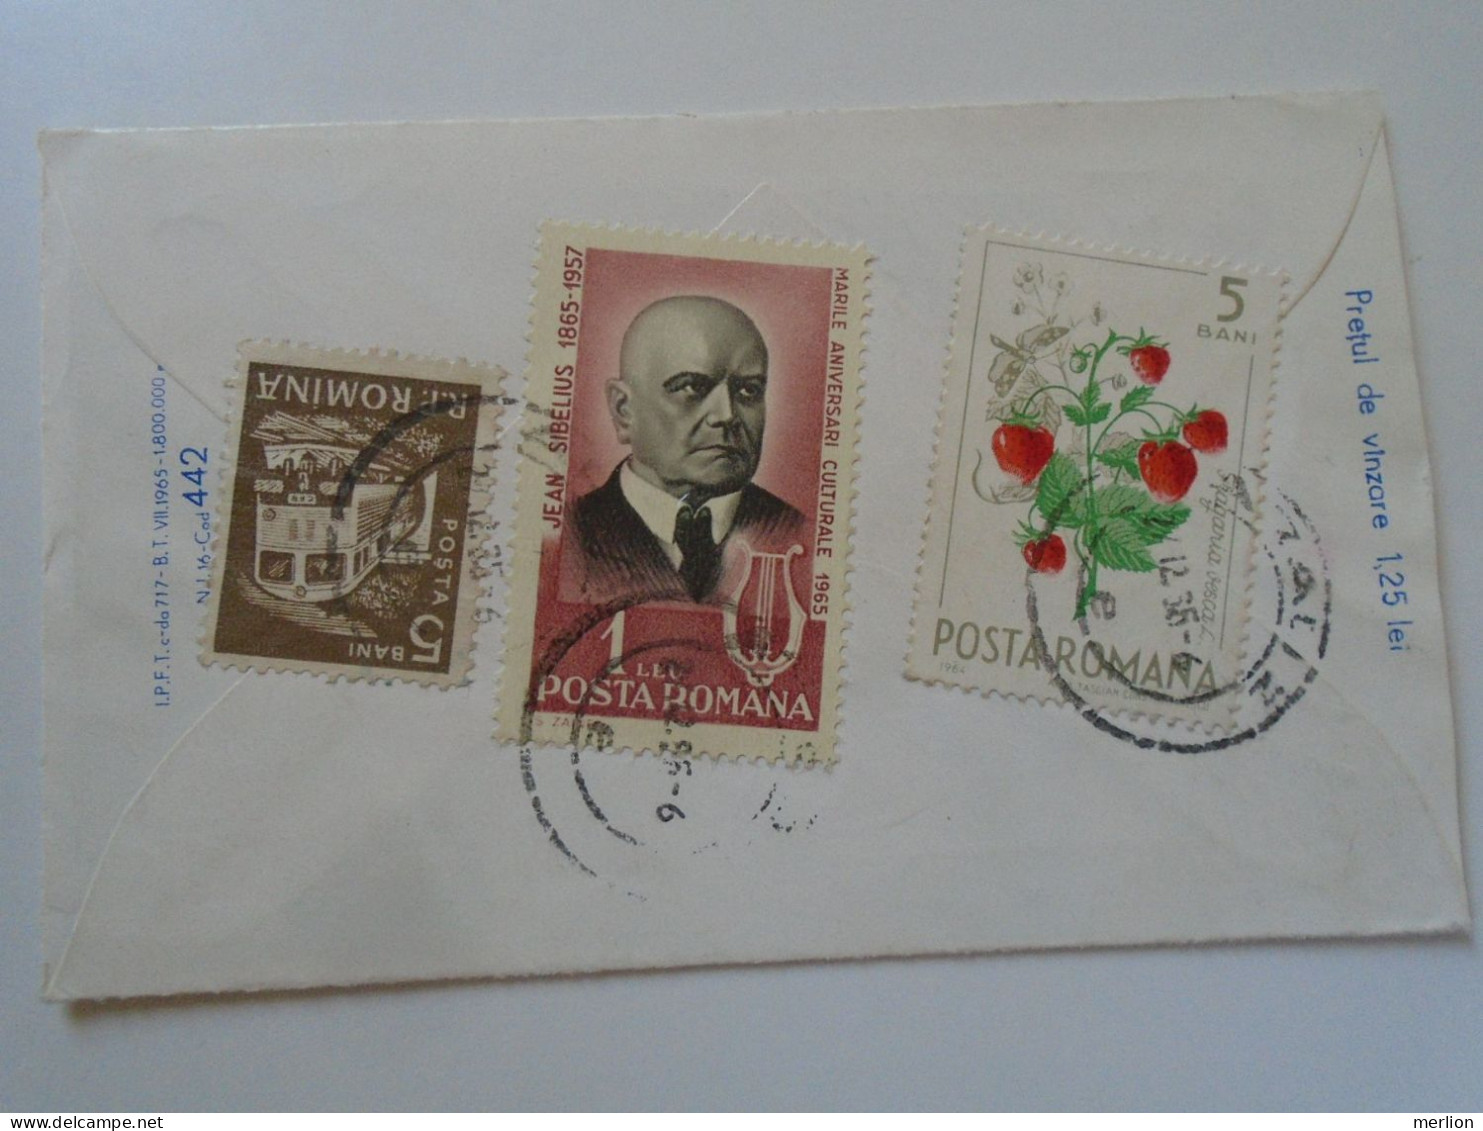 D197929 Romania Small Stationery Lilliput  Cover  Arad 1965  Sent To Hungary  Brenner Éva   Stamp  Train Berry Sibelius - Lettres & Documents